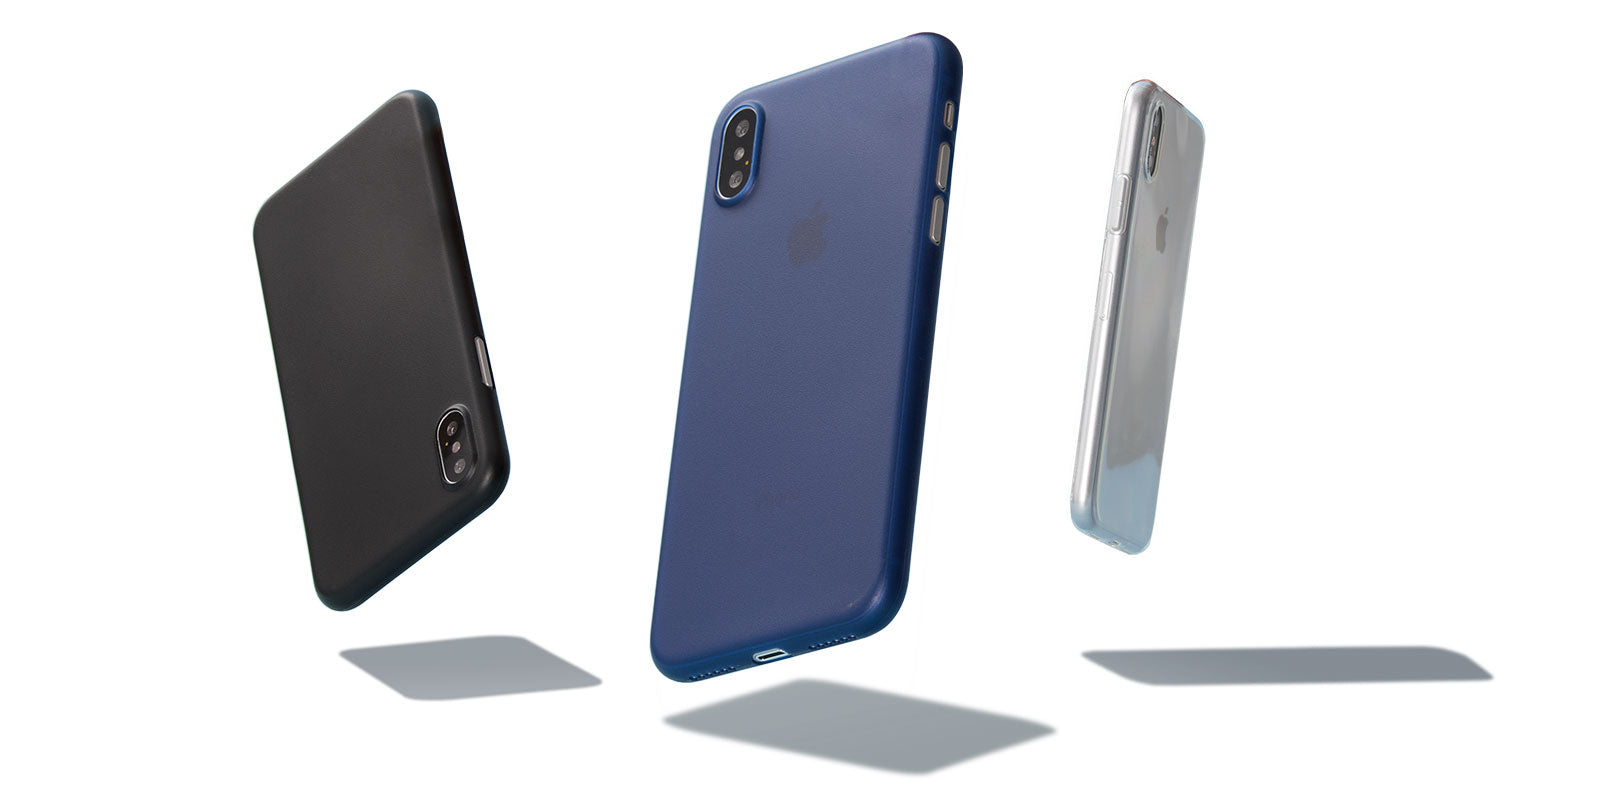 totallee's 3 thin iPhone cases